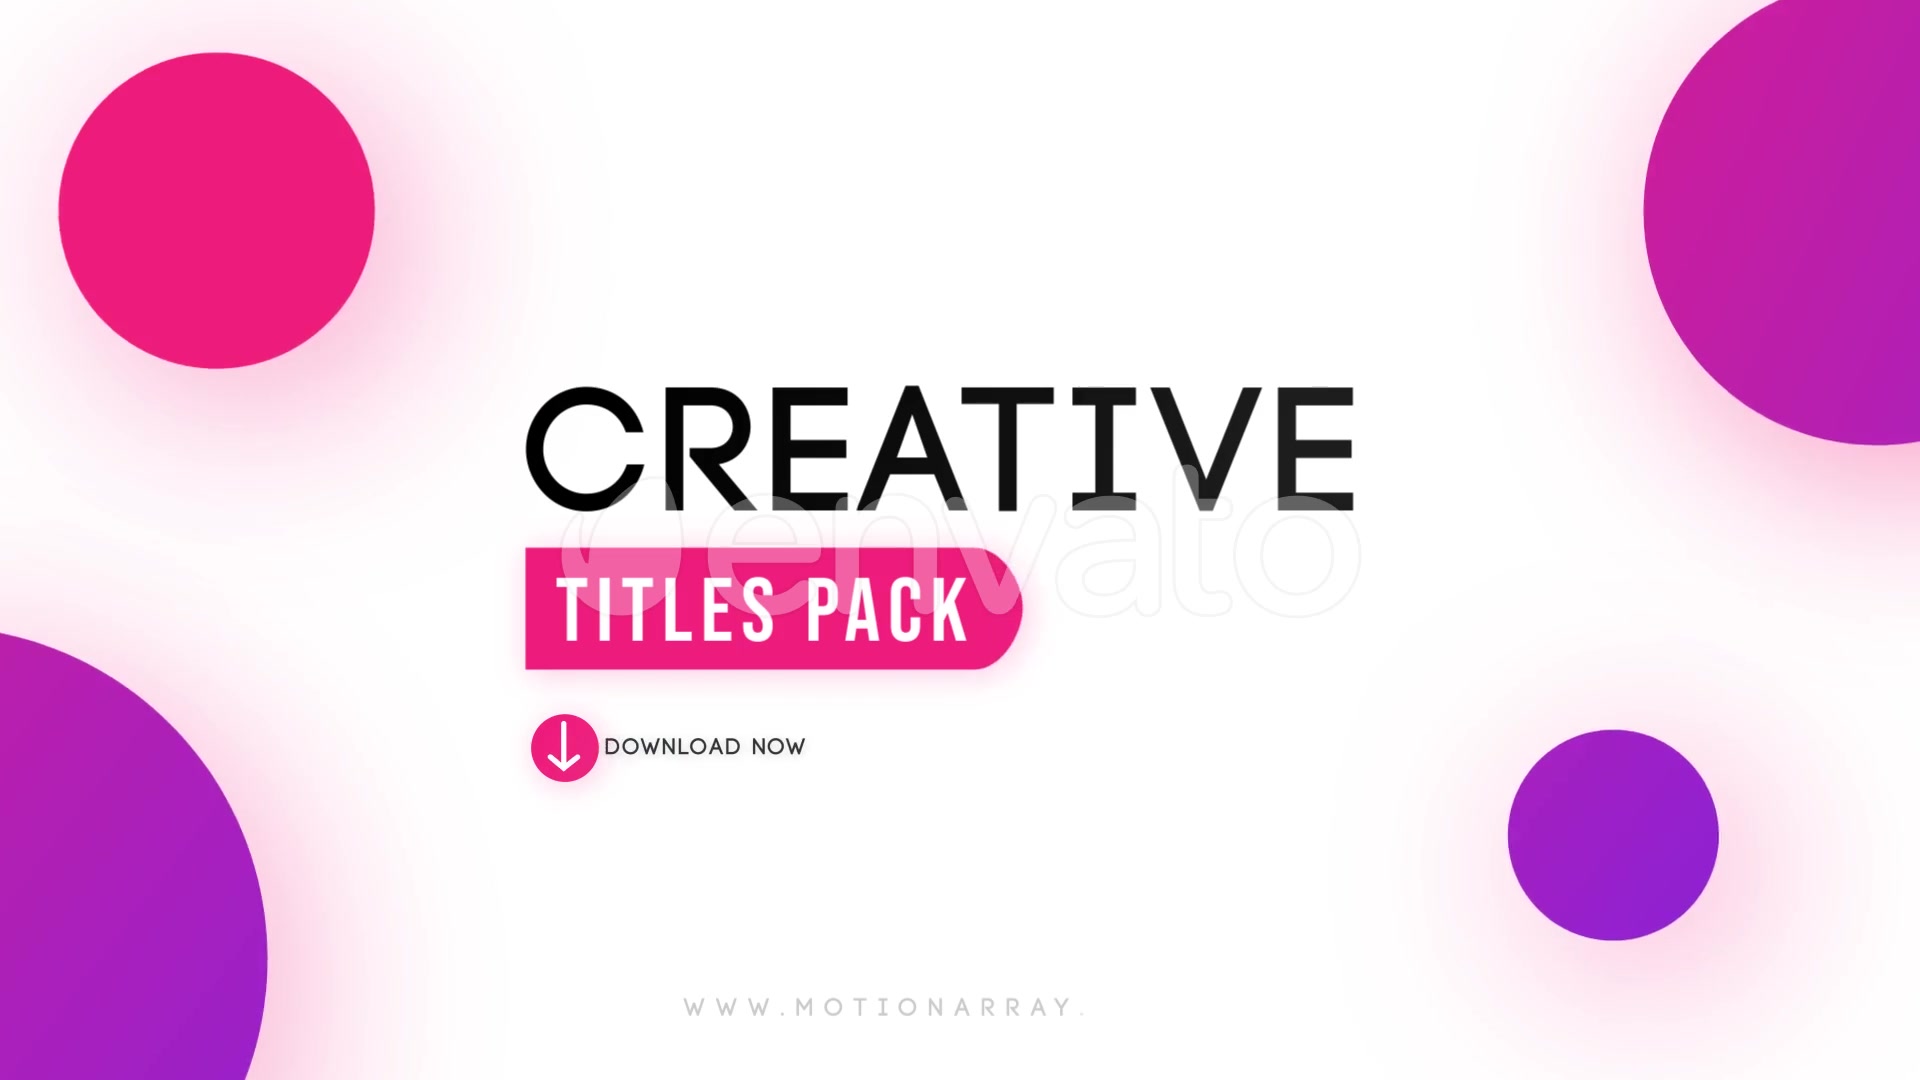 Creative Titles Pack MOGRTs Videohive 25160957 Premiere Pro Image 7